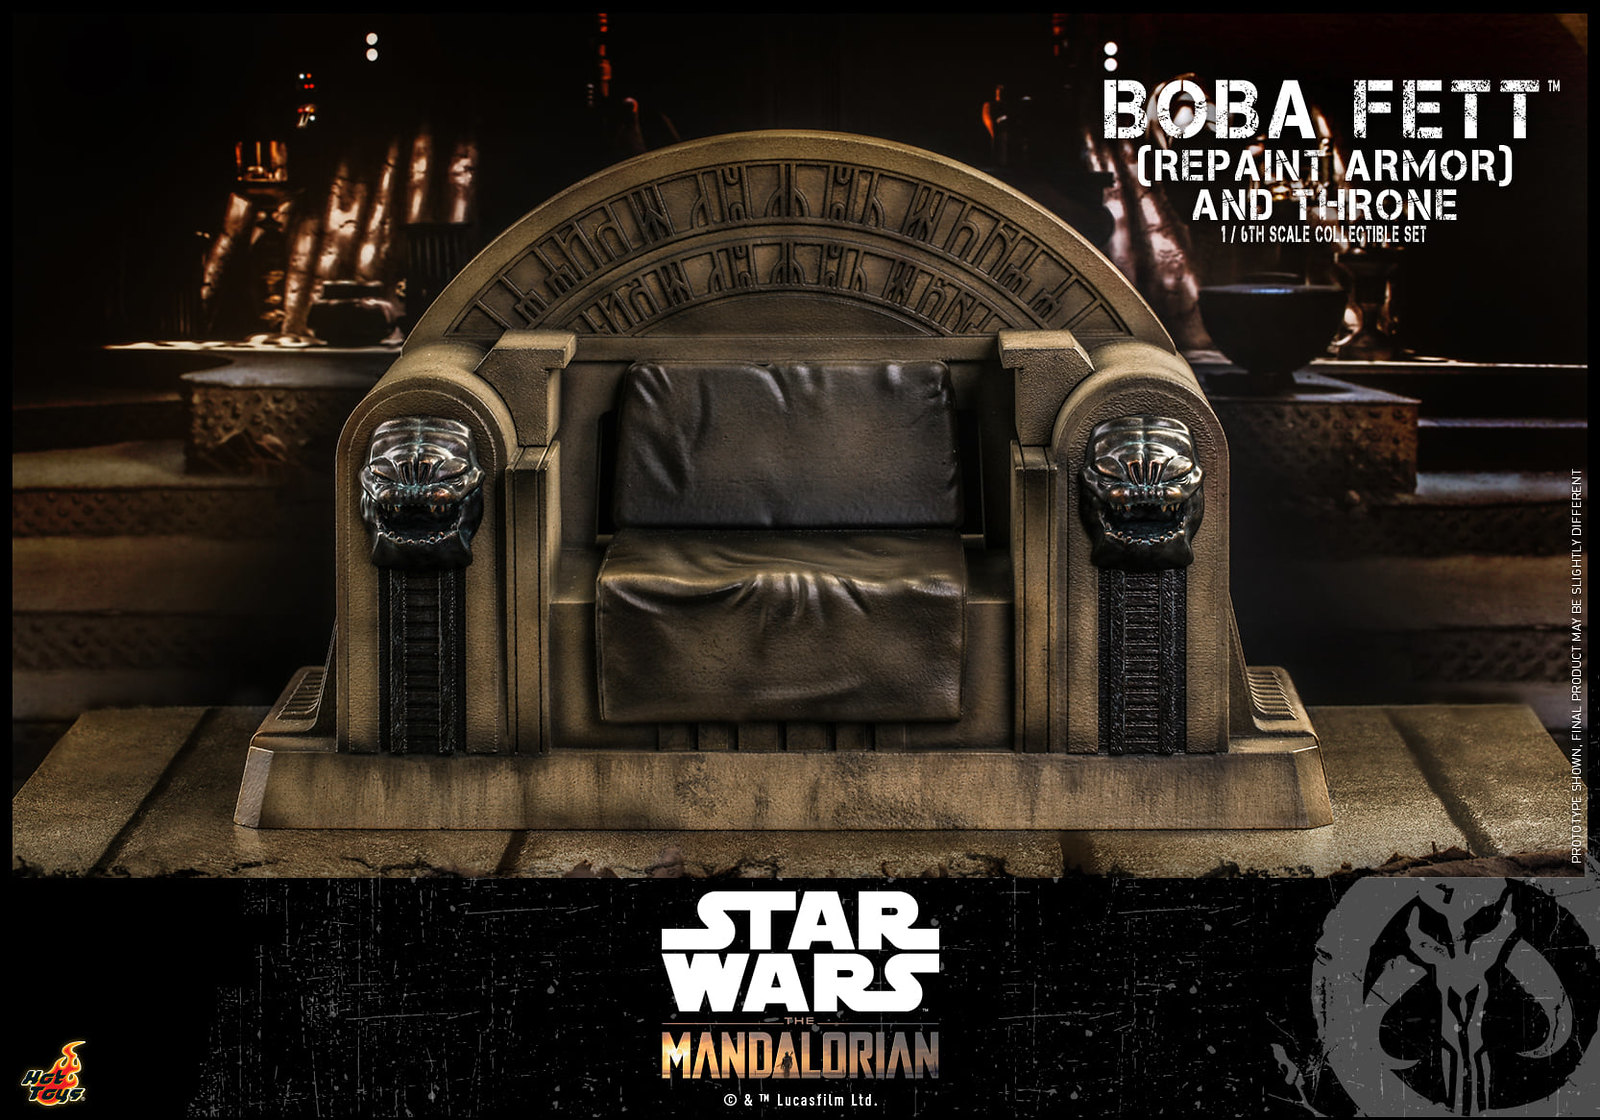 Star Wars: The Mandalorian™ - 1/6th scale Boba Fett™ (Repaint Armor) Collectible figure/ figure and Throne Collectible Set 51312018534_ef515e4fa3_h